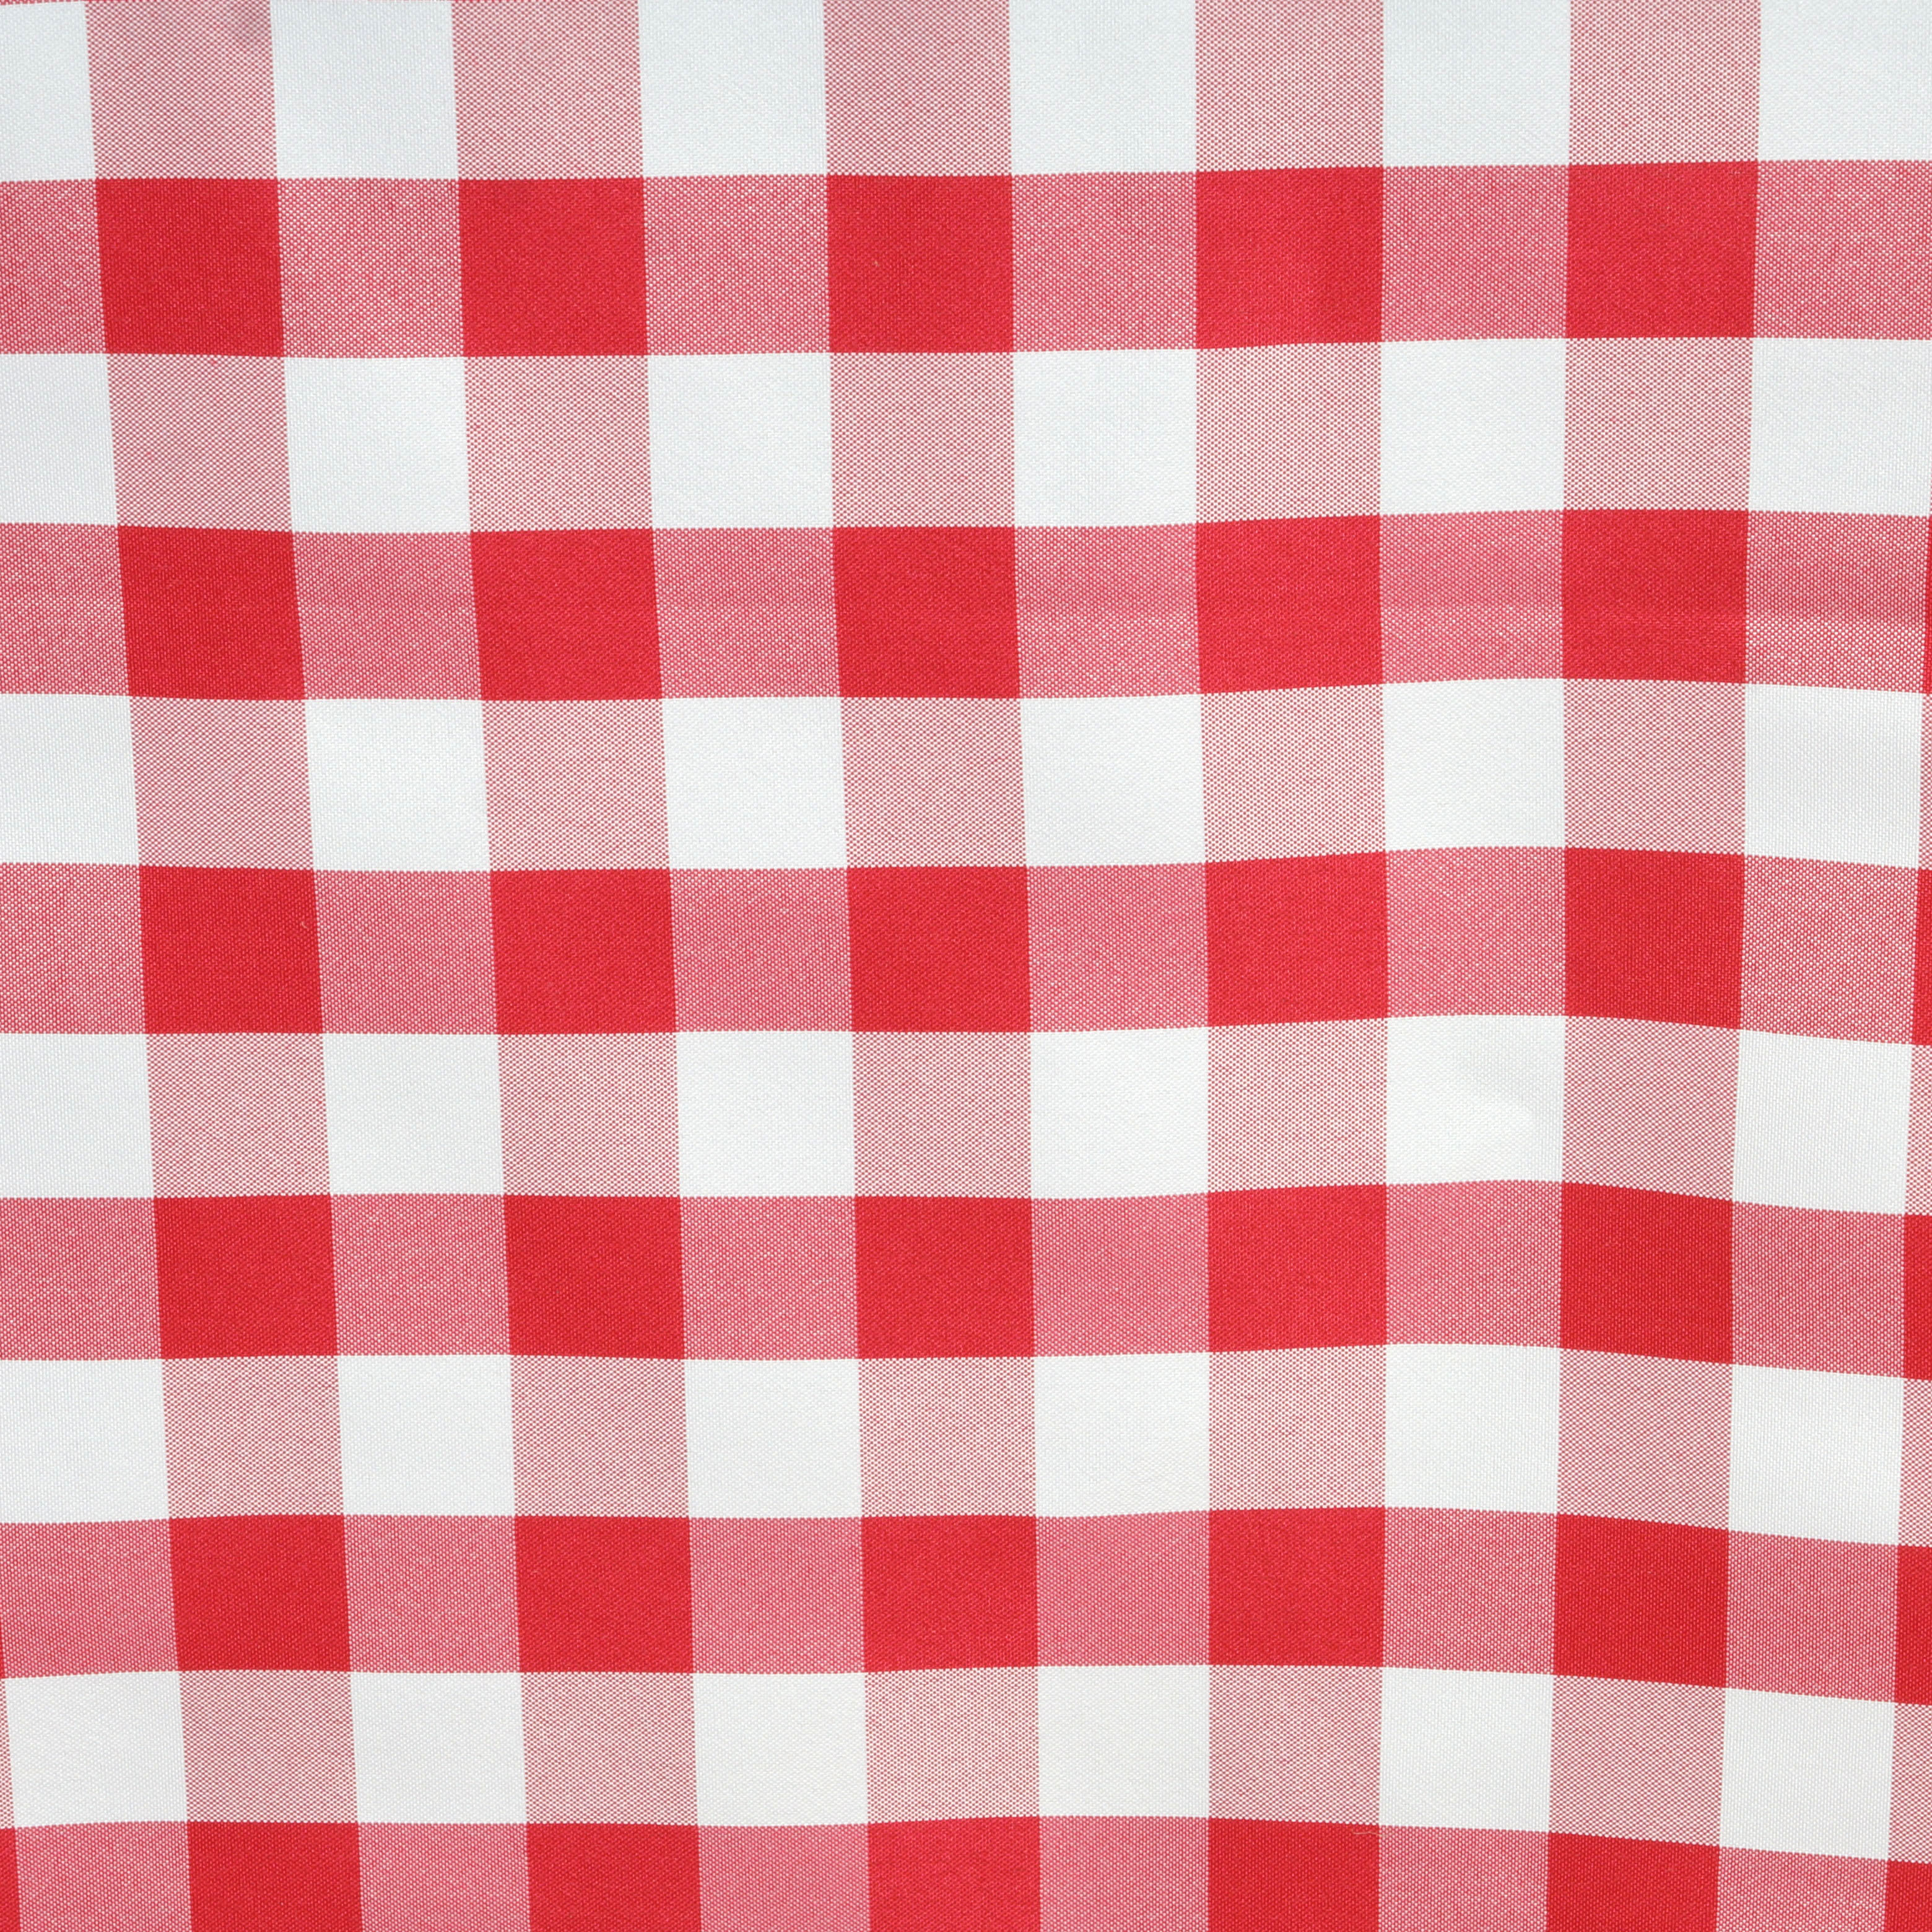 BalsaCircle 54" x 54" Square Gingham Checkered Polyester Tablecloth Red and White - image 2 of 9